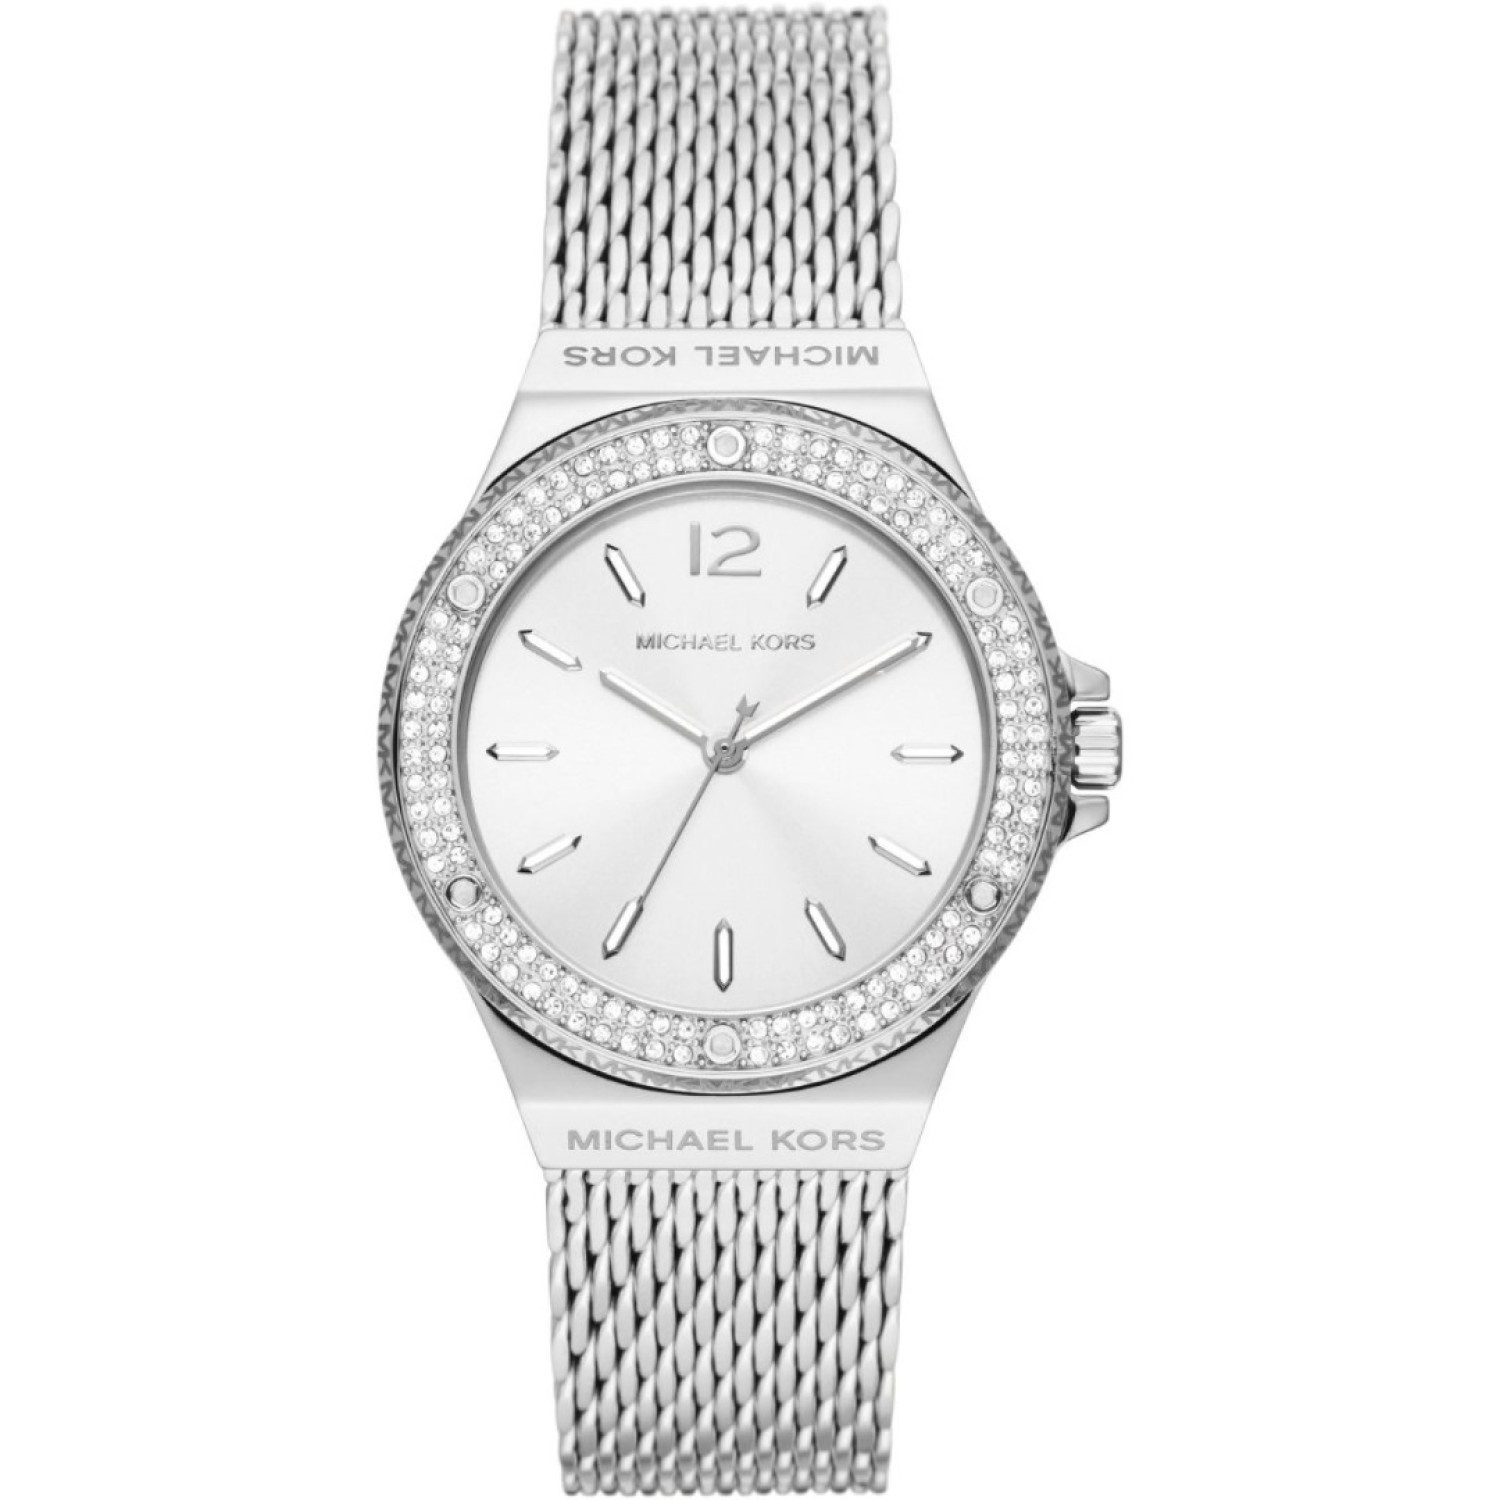 MK7337 Michael Kors Lennox  SilverTone Watch. MK7337 Michael Kors Lennox Three-Hand Silver-Tone Stainless Steel Watch The Michael Kors MK7337 is a luxurious and stylish women's watch that exudes sophistication and class.